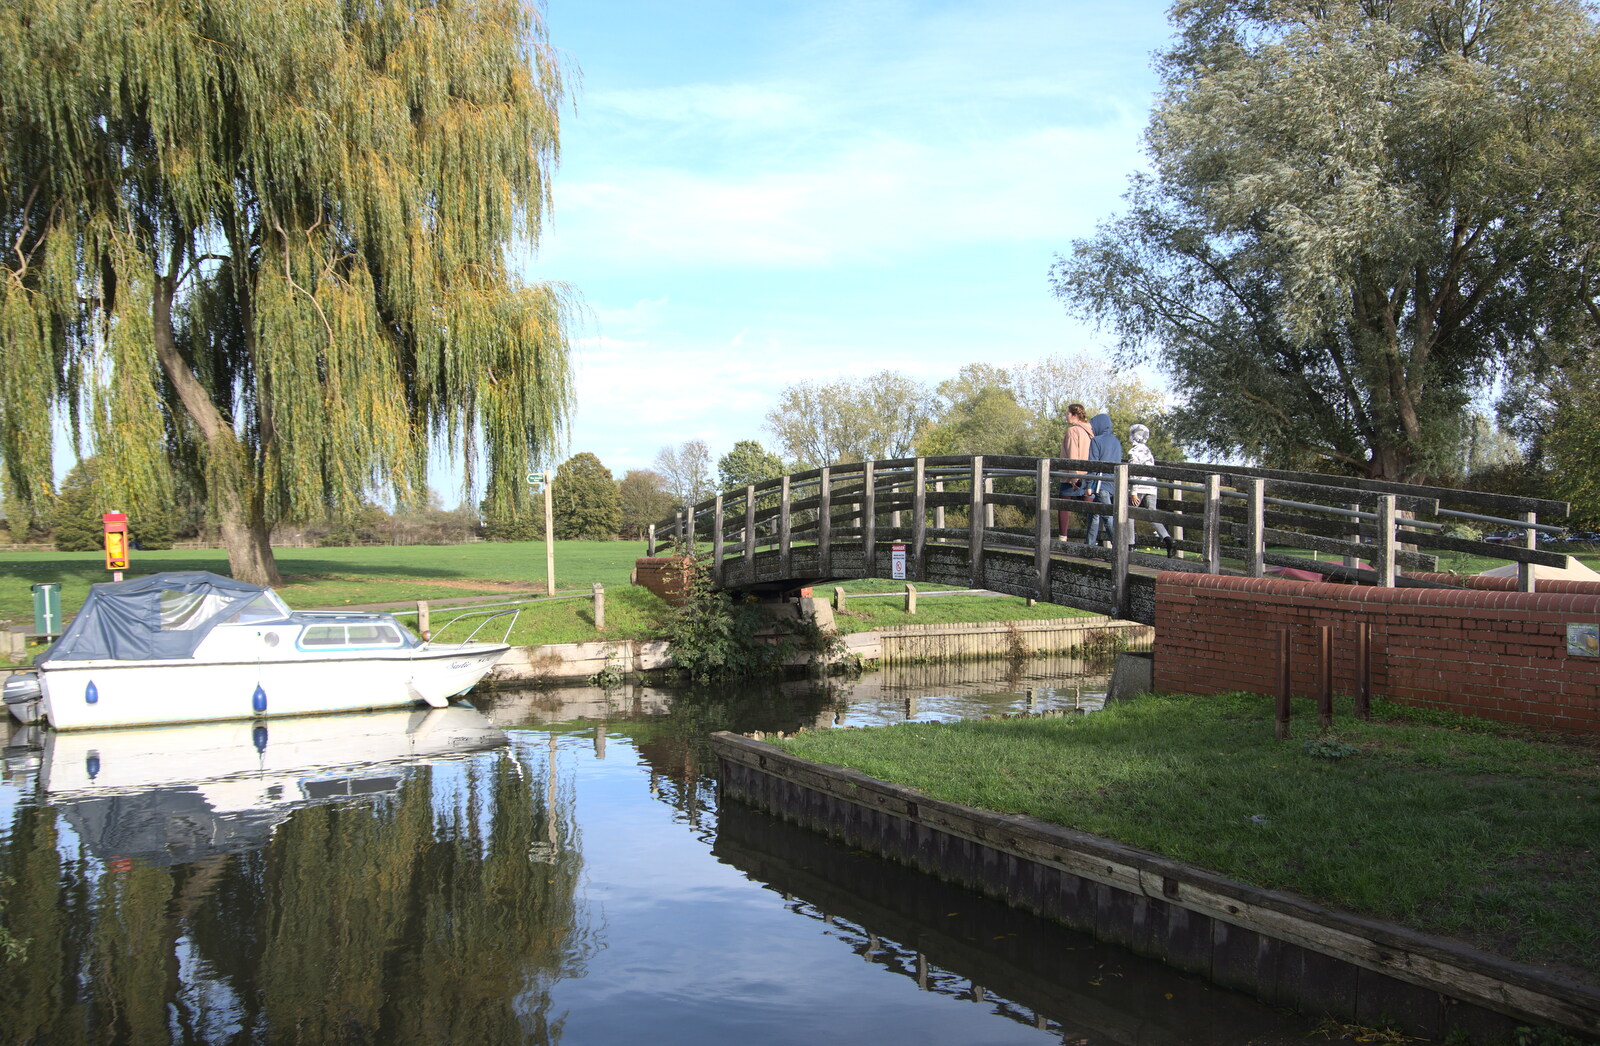 An Afternoon in Beccles, Suffolk - 26th October 2022: The gang walk over the bridge